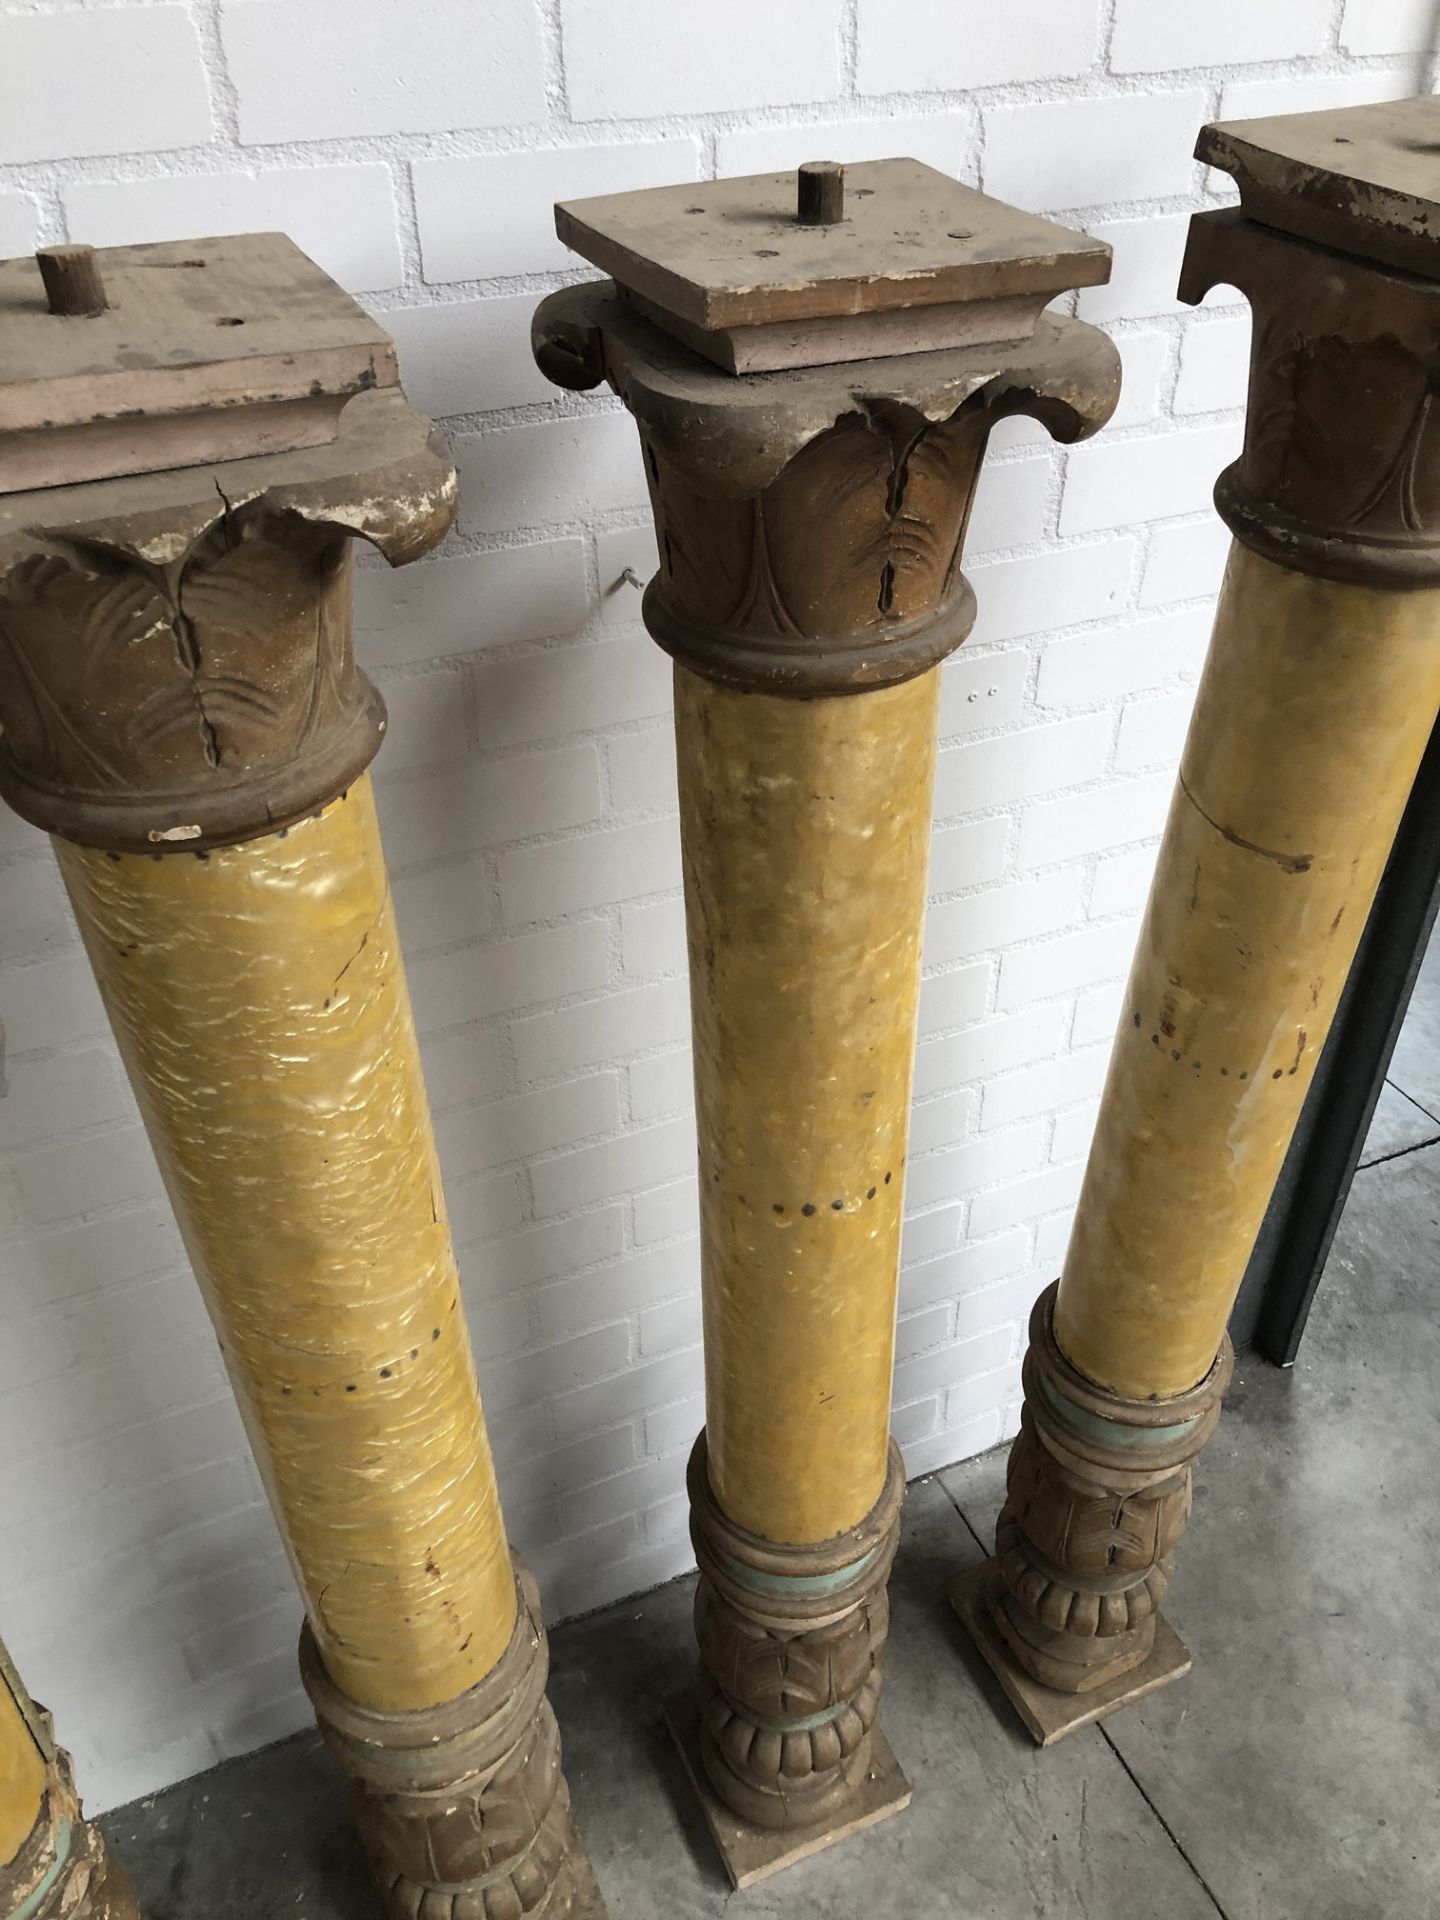 Set of 4 Wooden Pillars from a Carousel or an Organ - Image 6 of 6